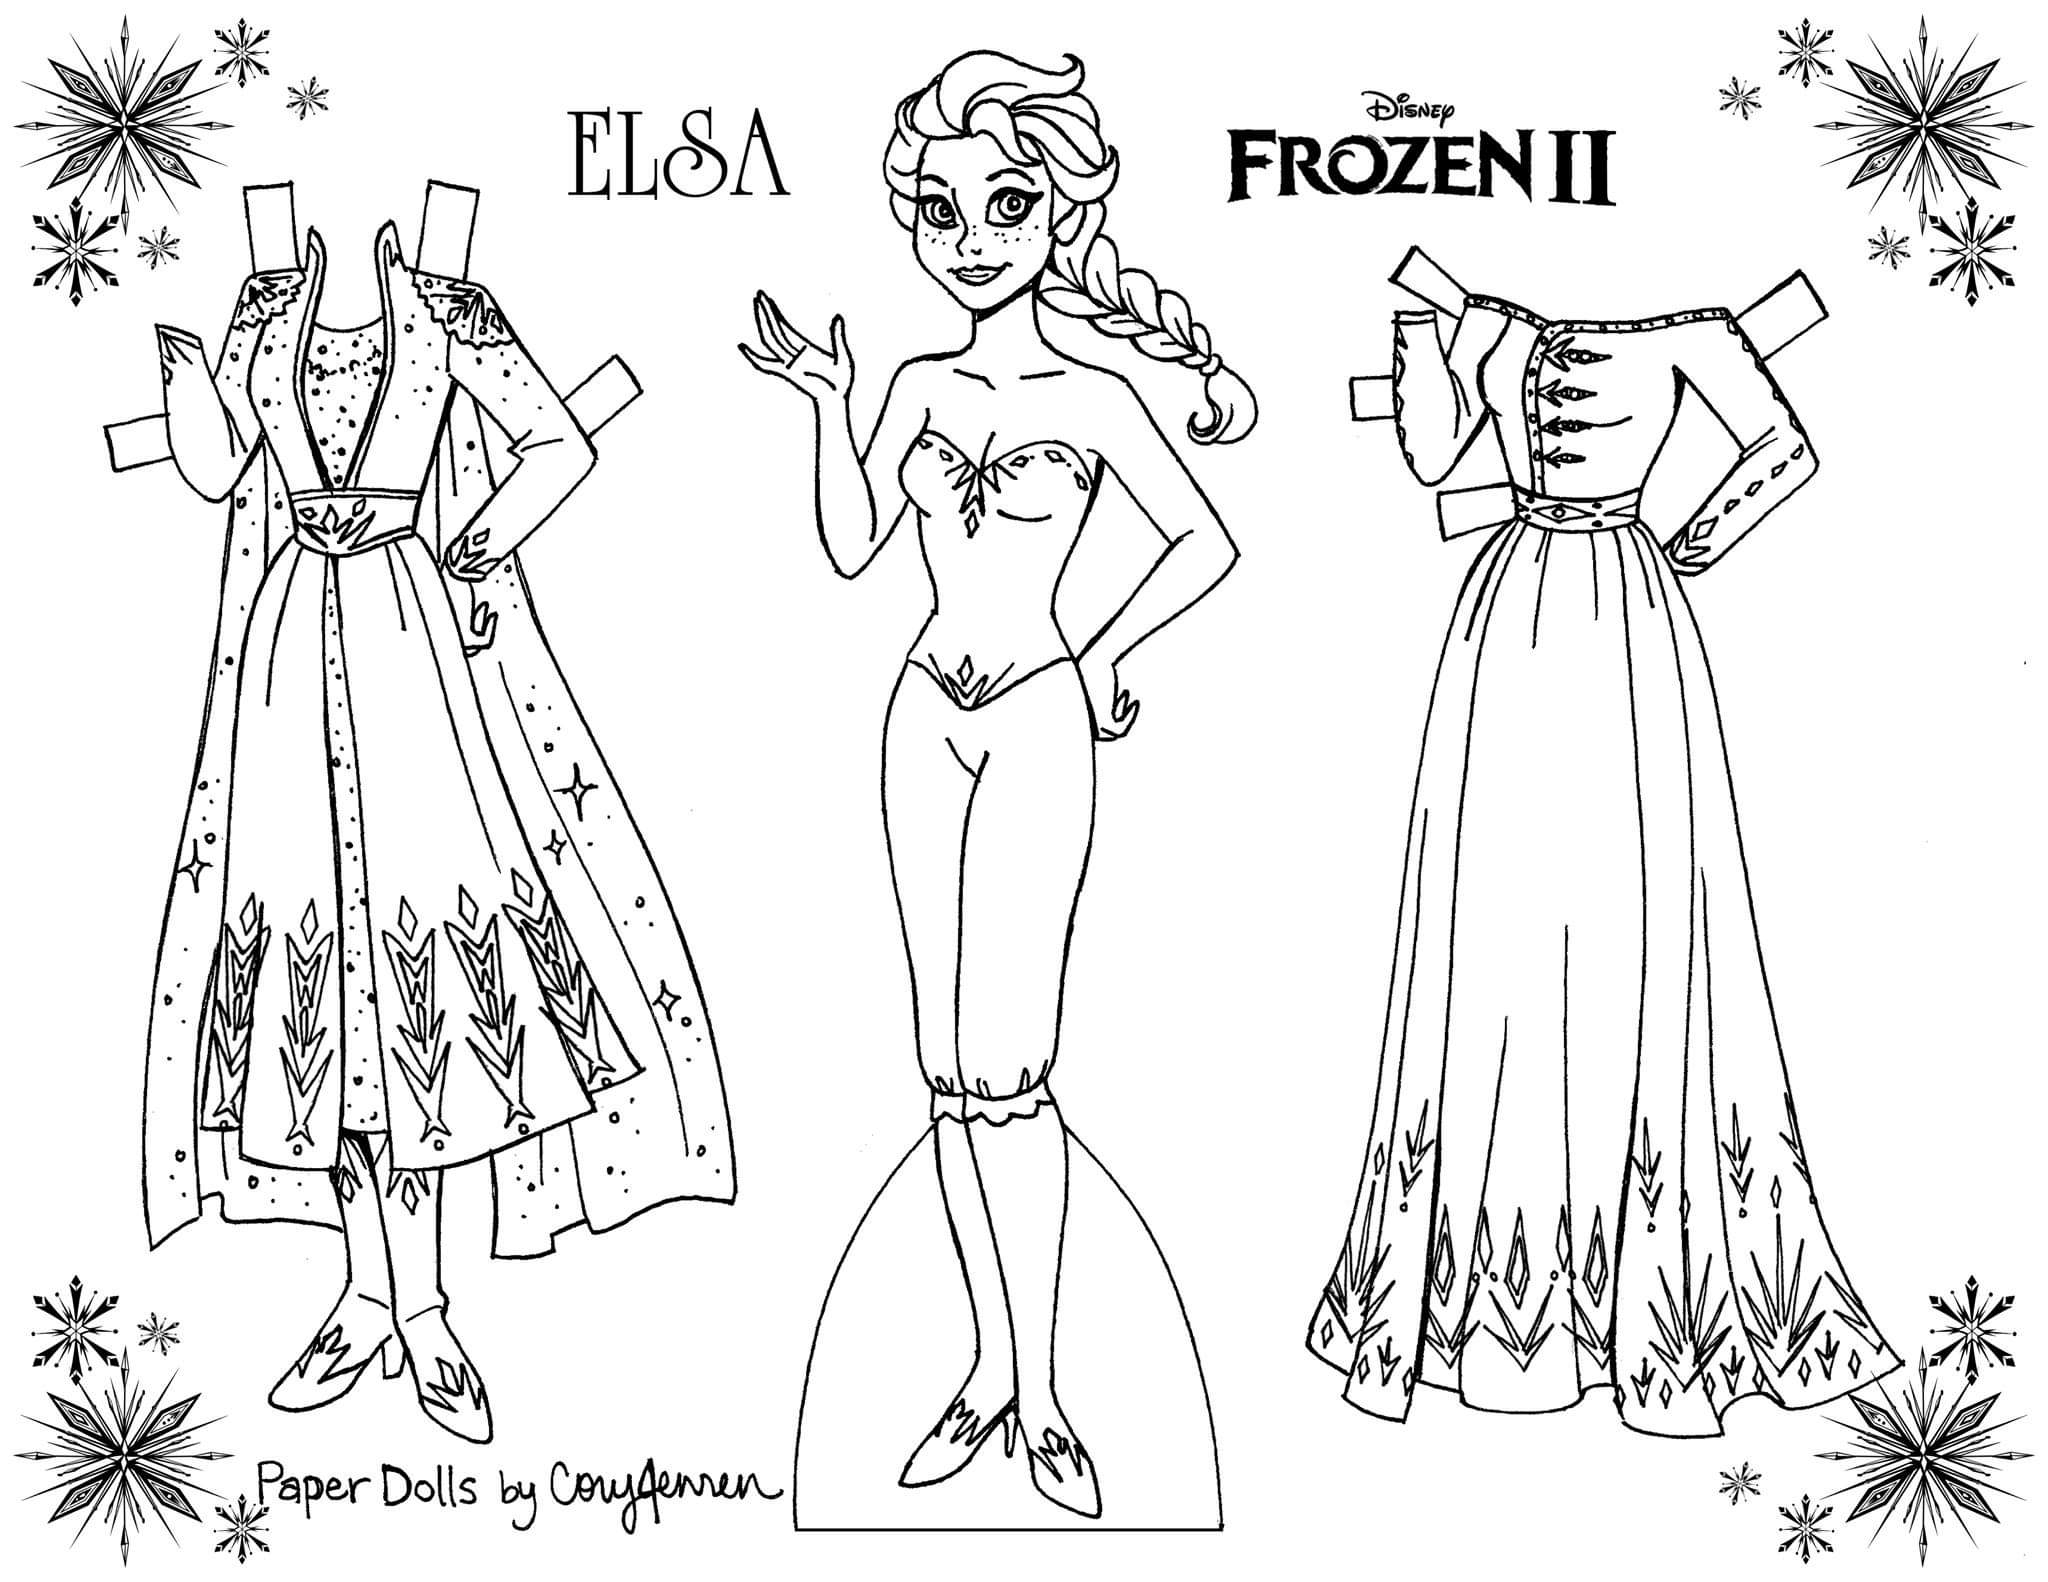 Frozen 20 coloring paper dolls of Elsa and Anna   YouLoveIt.com